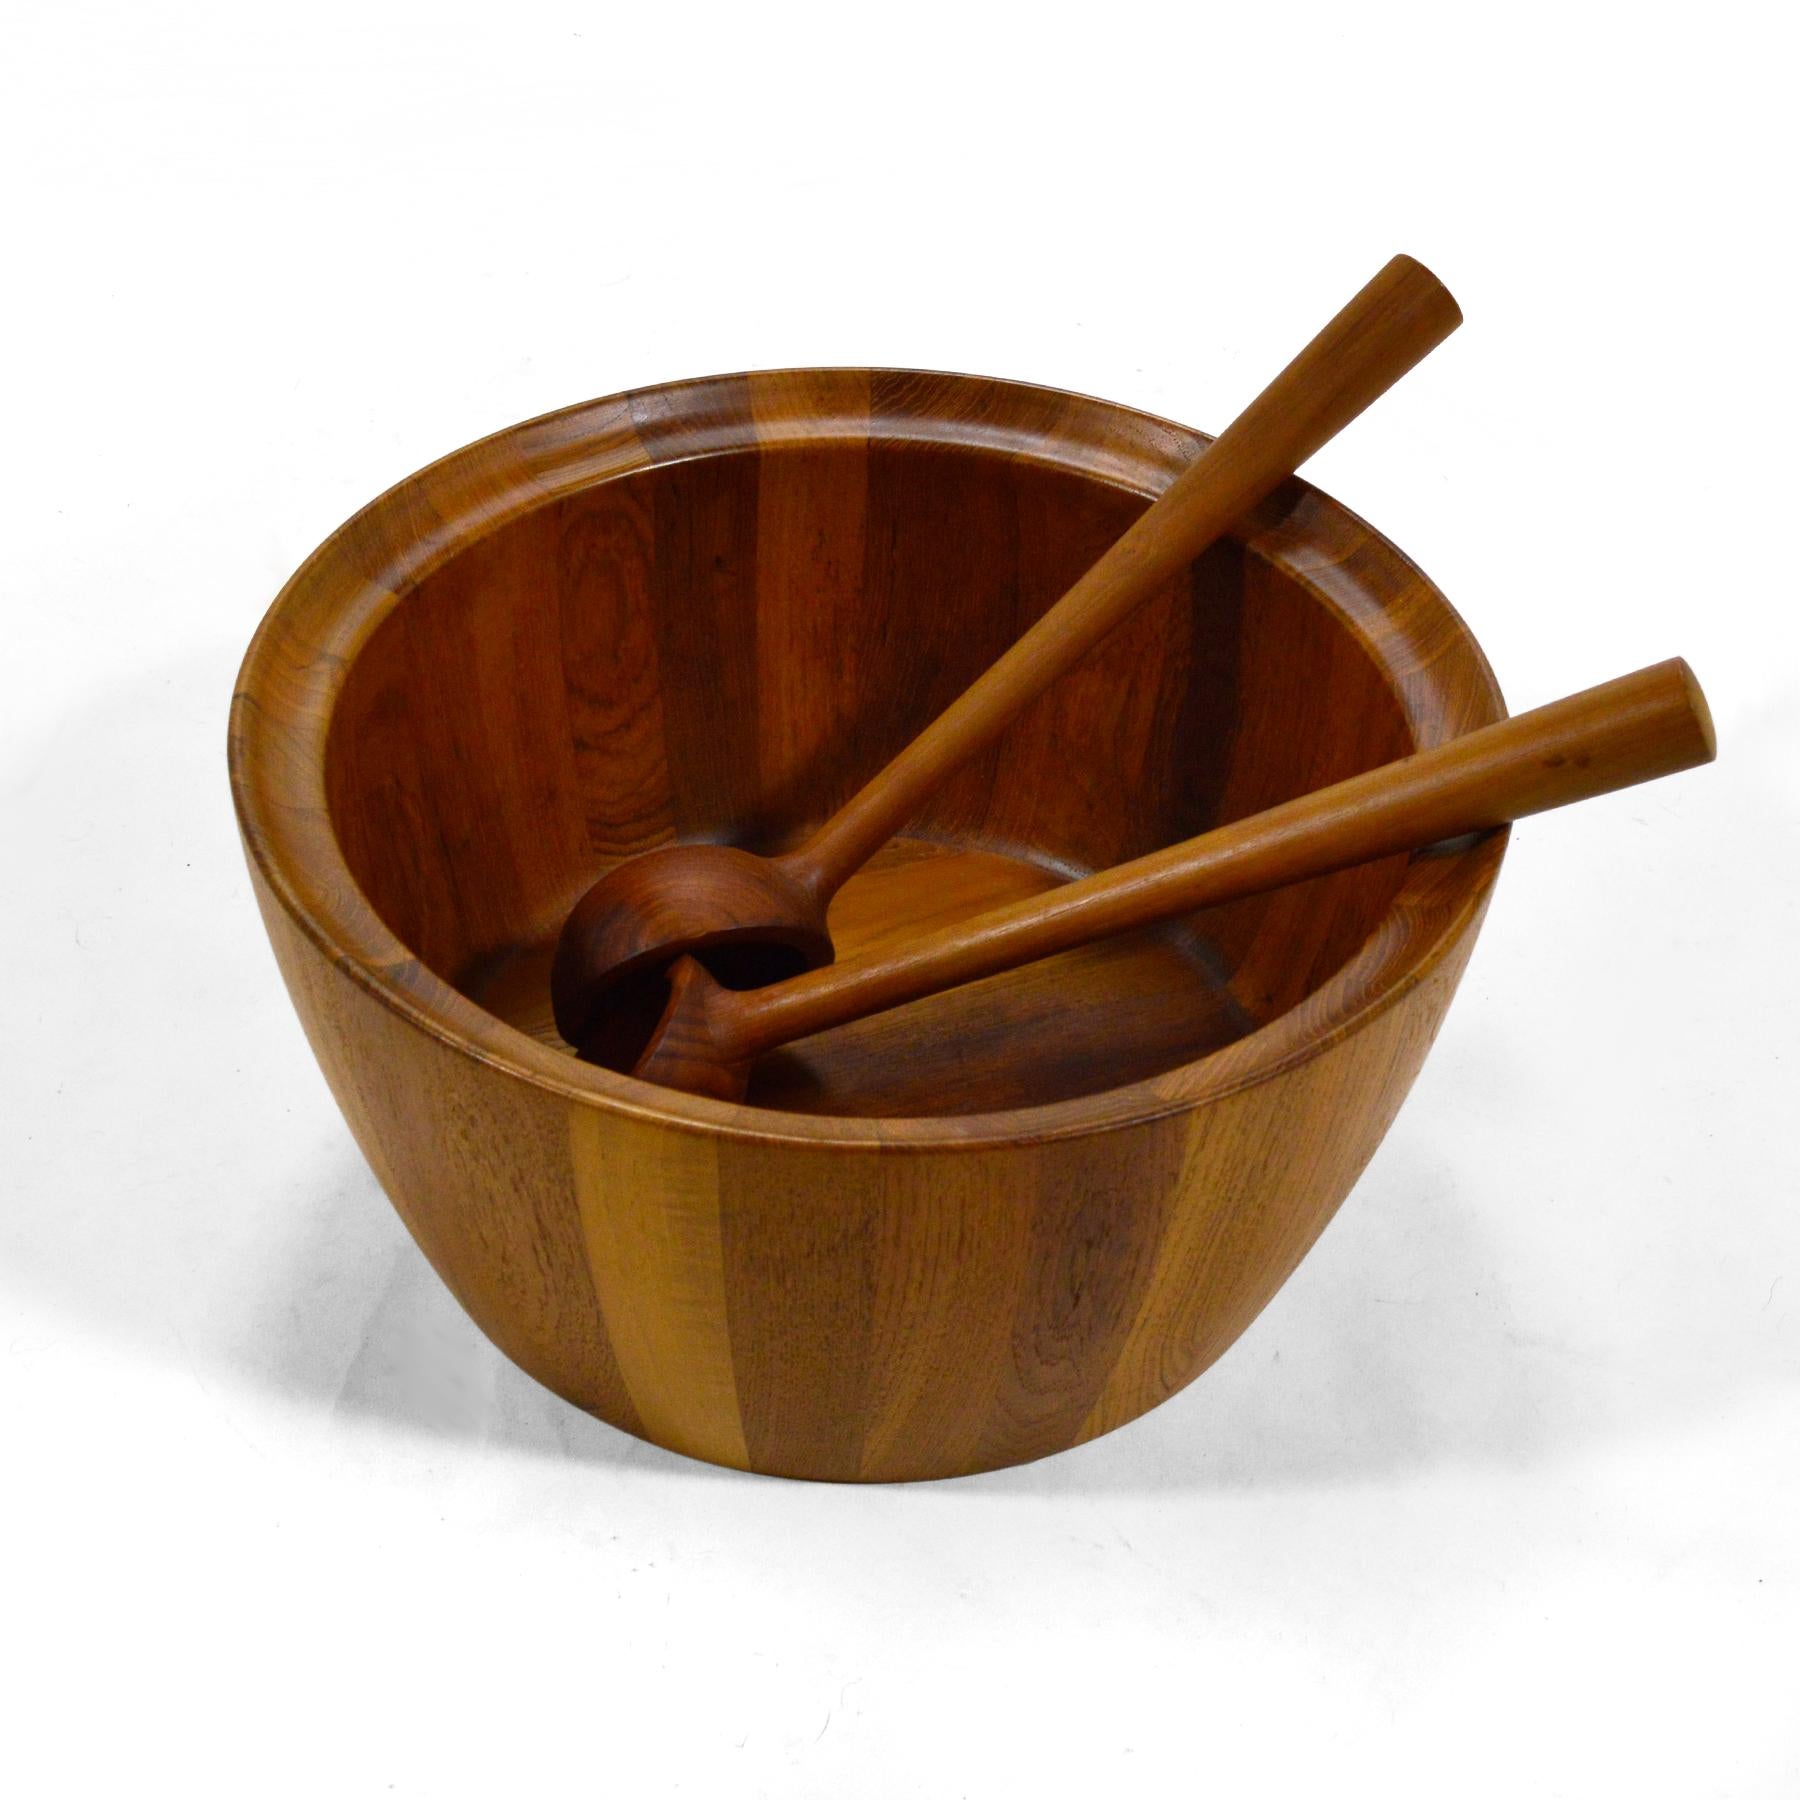 This spectacular staved teak bowl by Richard Nissen is not only noteworthy for its design and quality of craftsmanship, but also for it's terrific large scale. It comes complete with a beautiful pair of servers. All three pieces are in fantastic